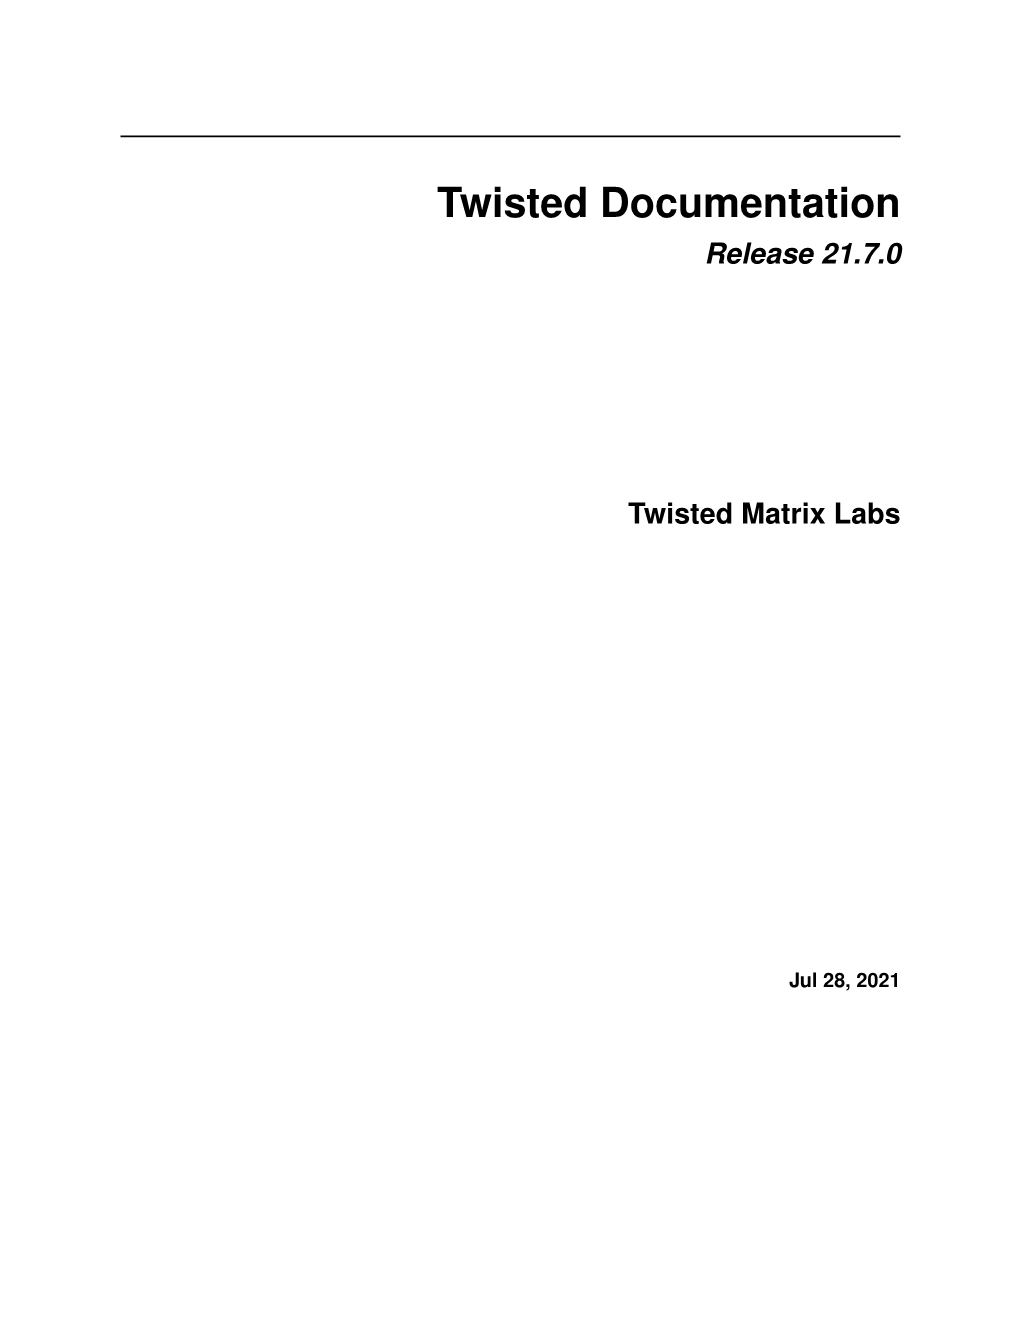 Twisted Documentation Release 21.7.0